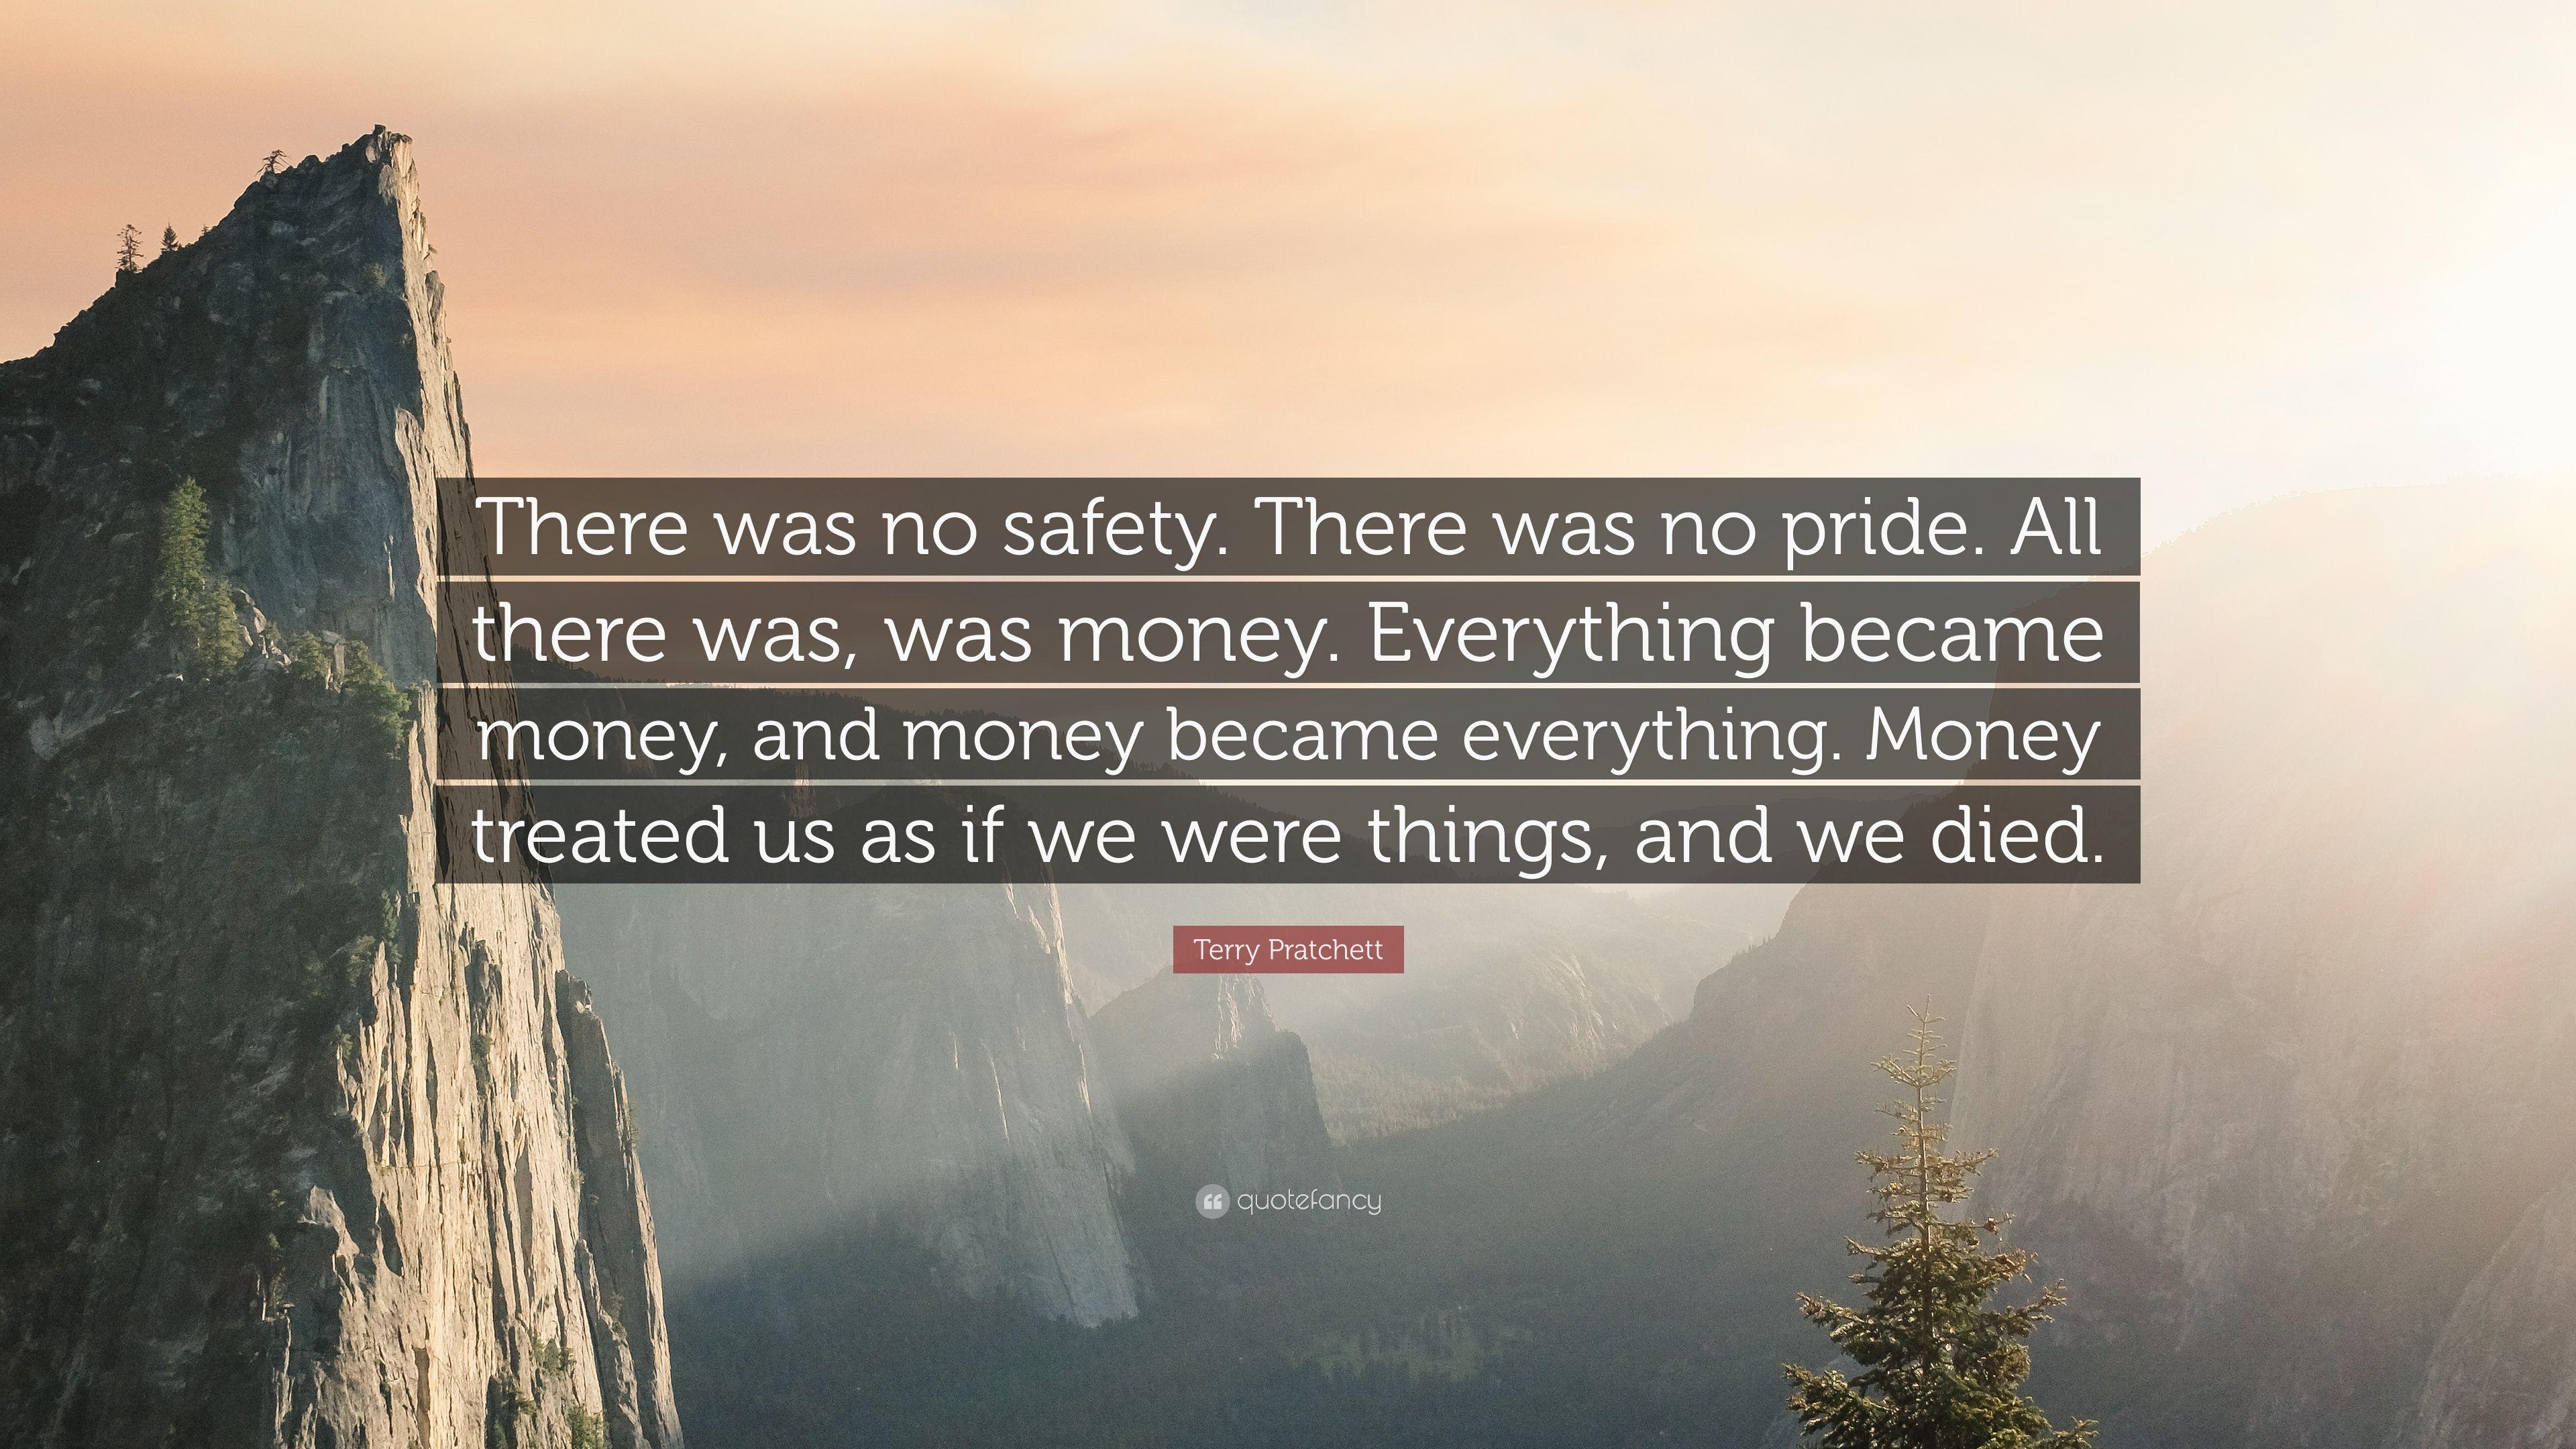 Terry Pratchett Quote: “There was no safety. There was no pride